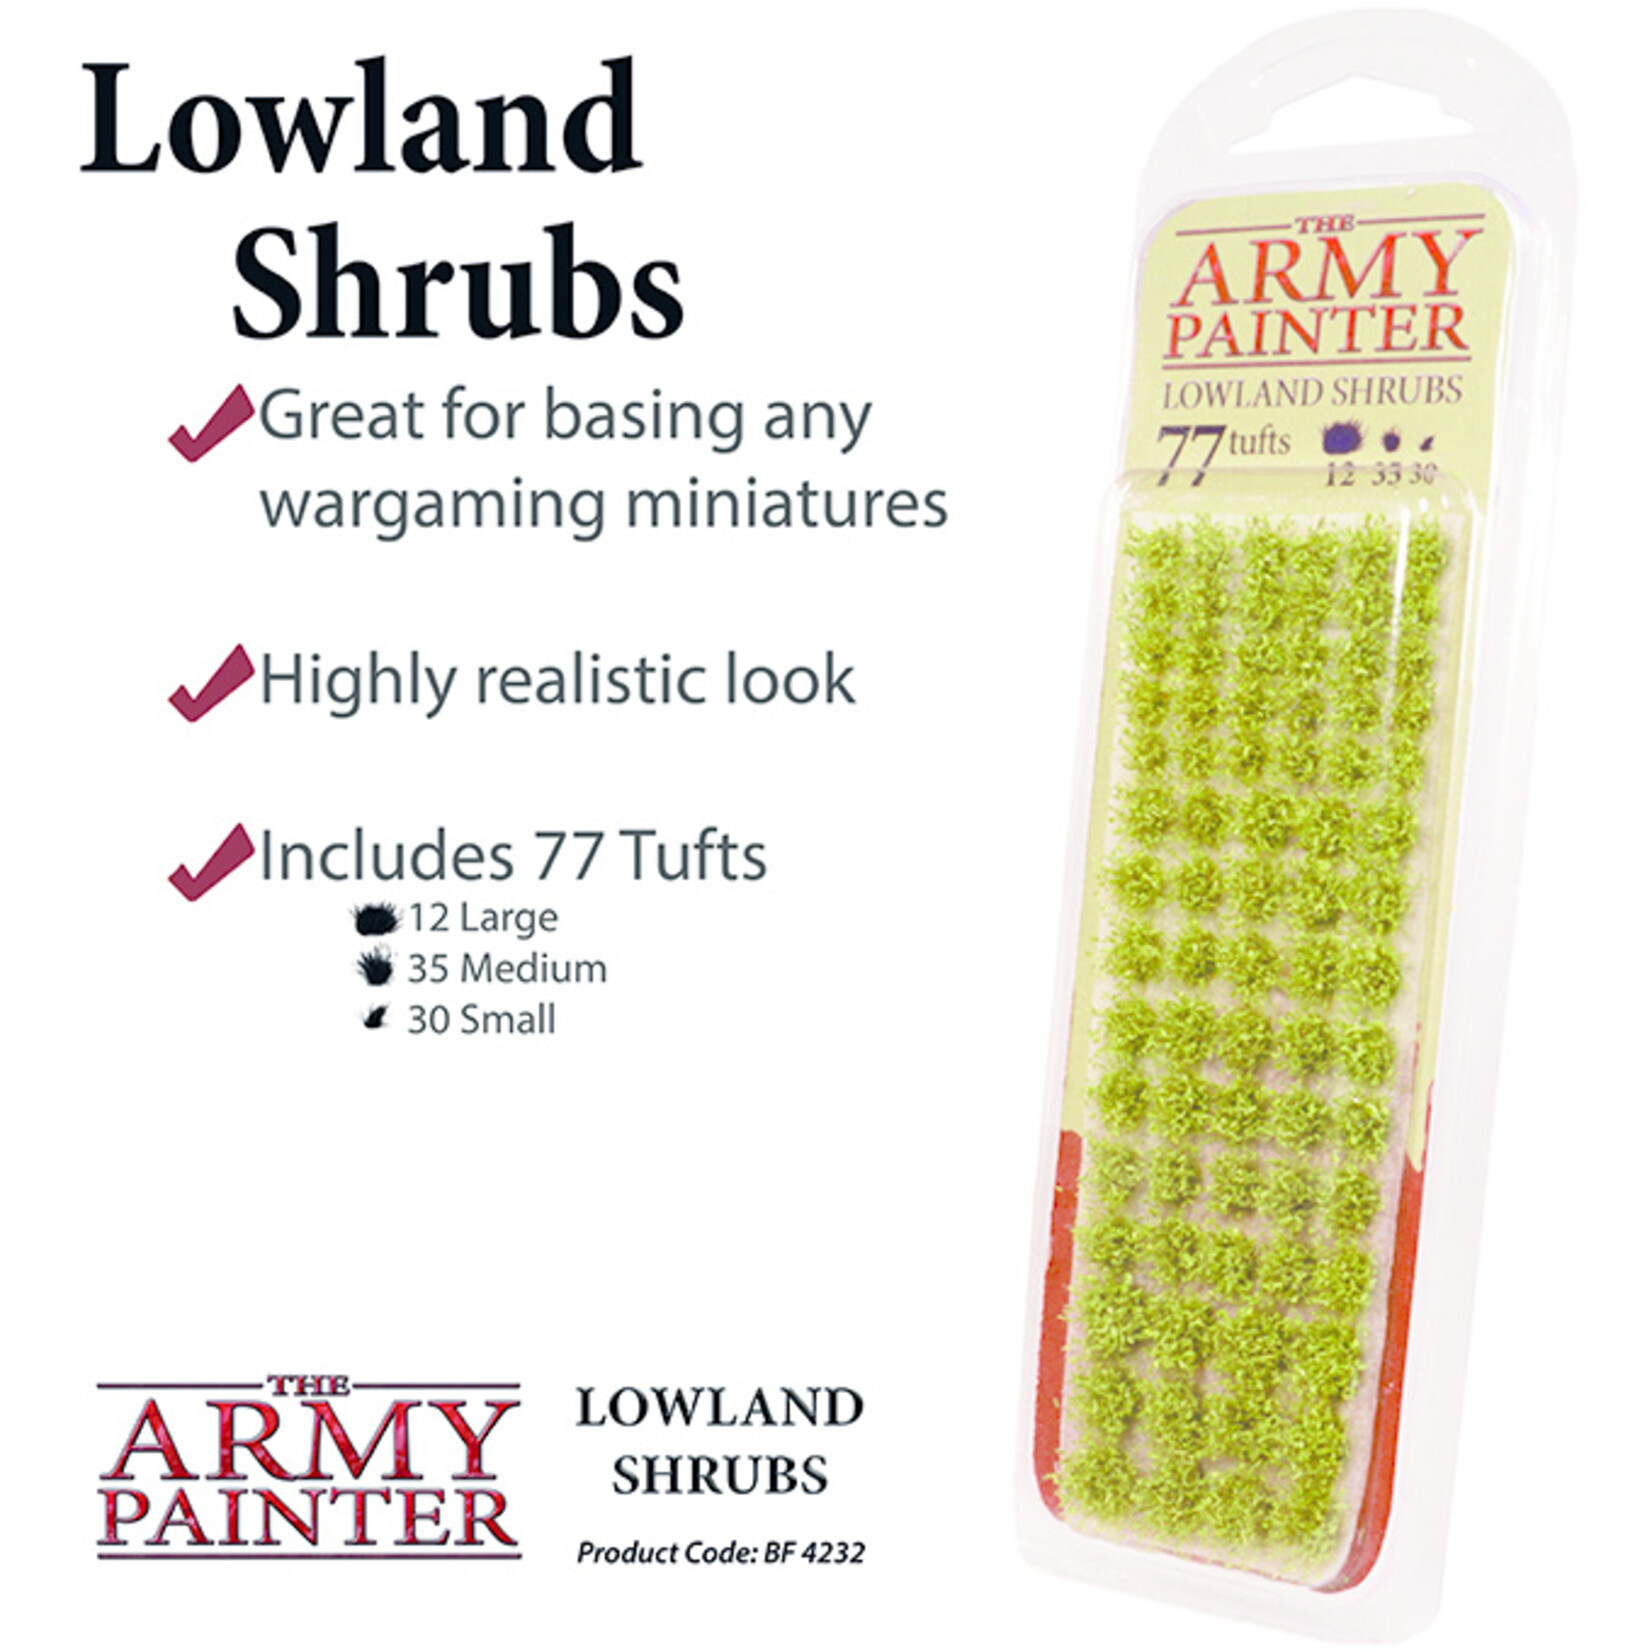 The Army Painter The Army Painter Tufts - Lowland Shrubs